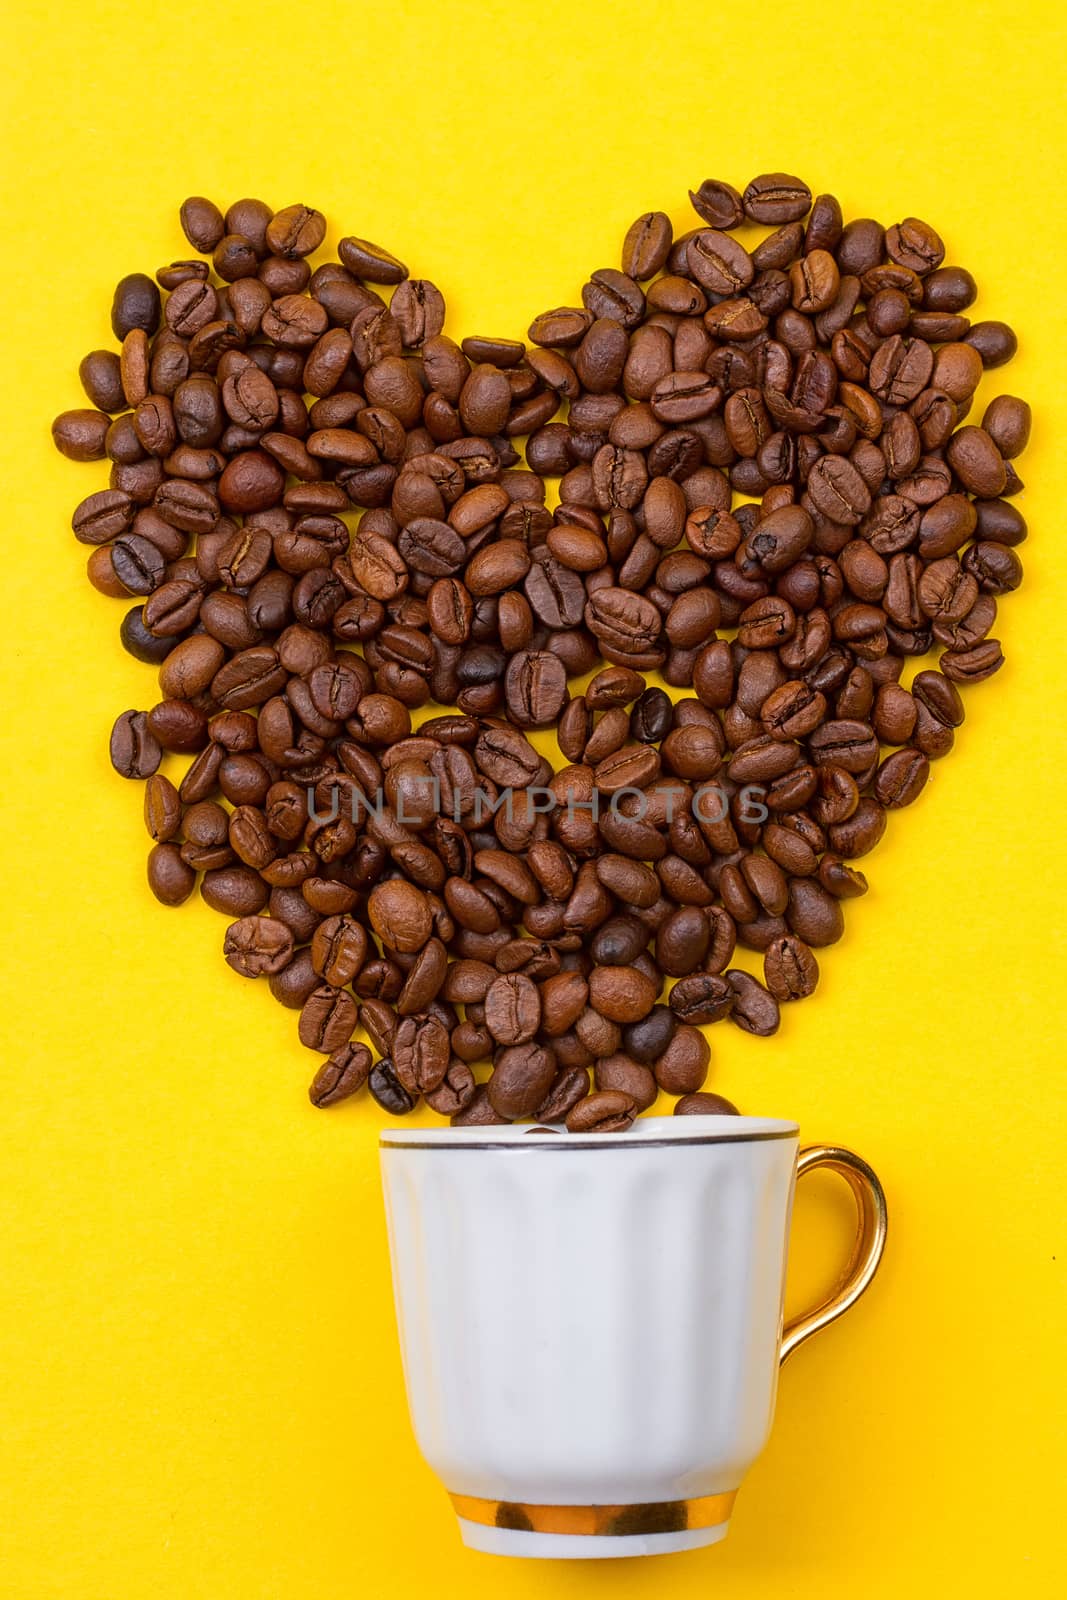 A cup of coffee and heart of the beans by victosha